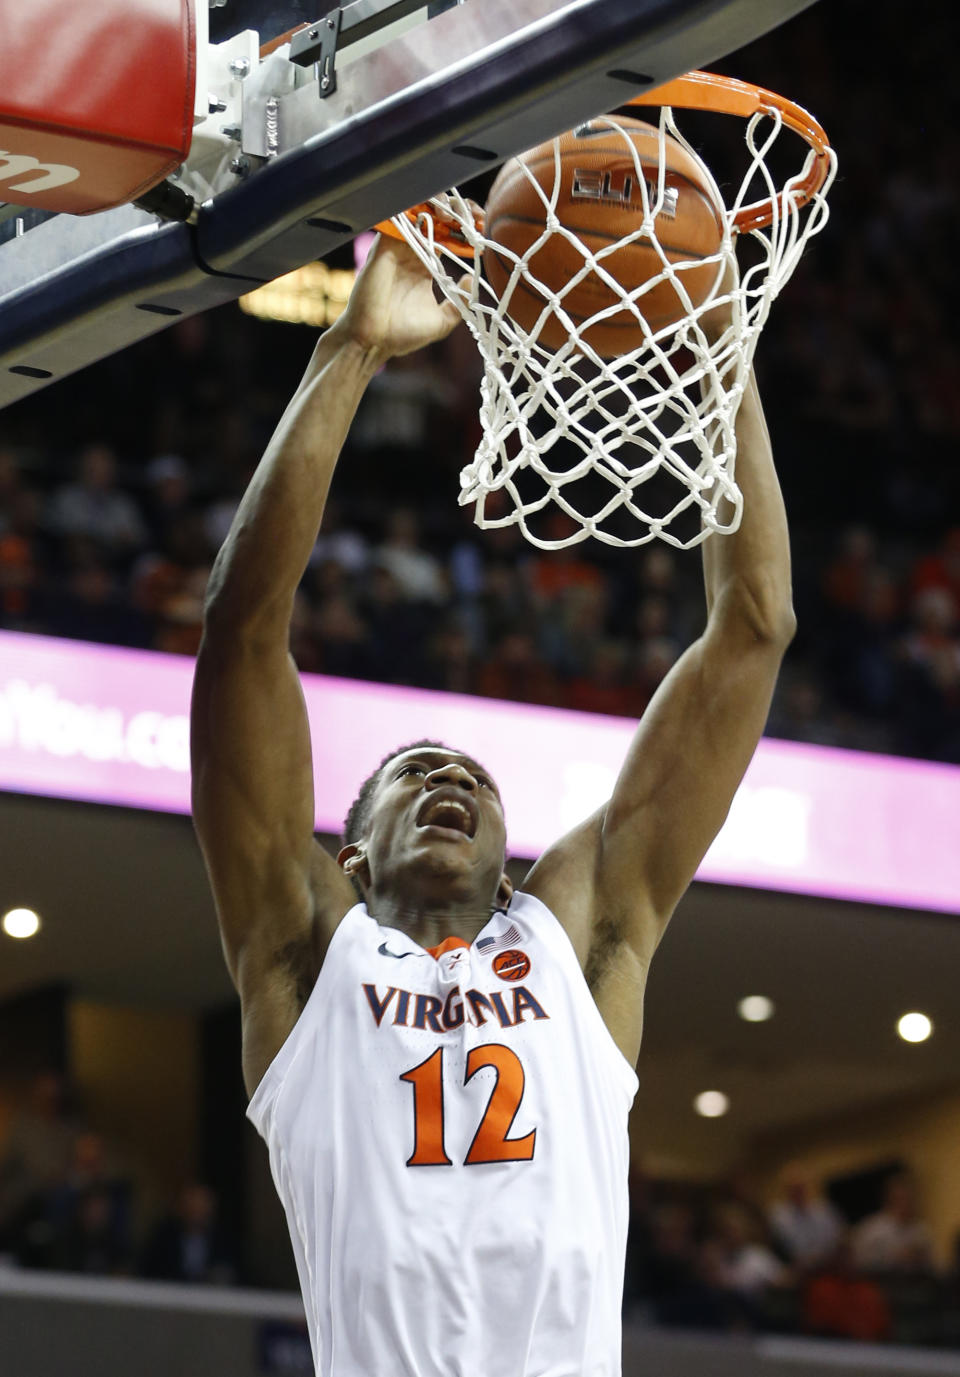 Virginia guard De'Andre Hunter (12) slams home a dunk during the first half of an NCAA college basketball game against Virginia Tech, in Charlottesville, Va., Tuesday, Jan. 15, 2019. (AP Photo/Steve Helber)